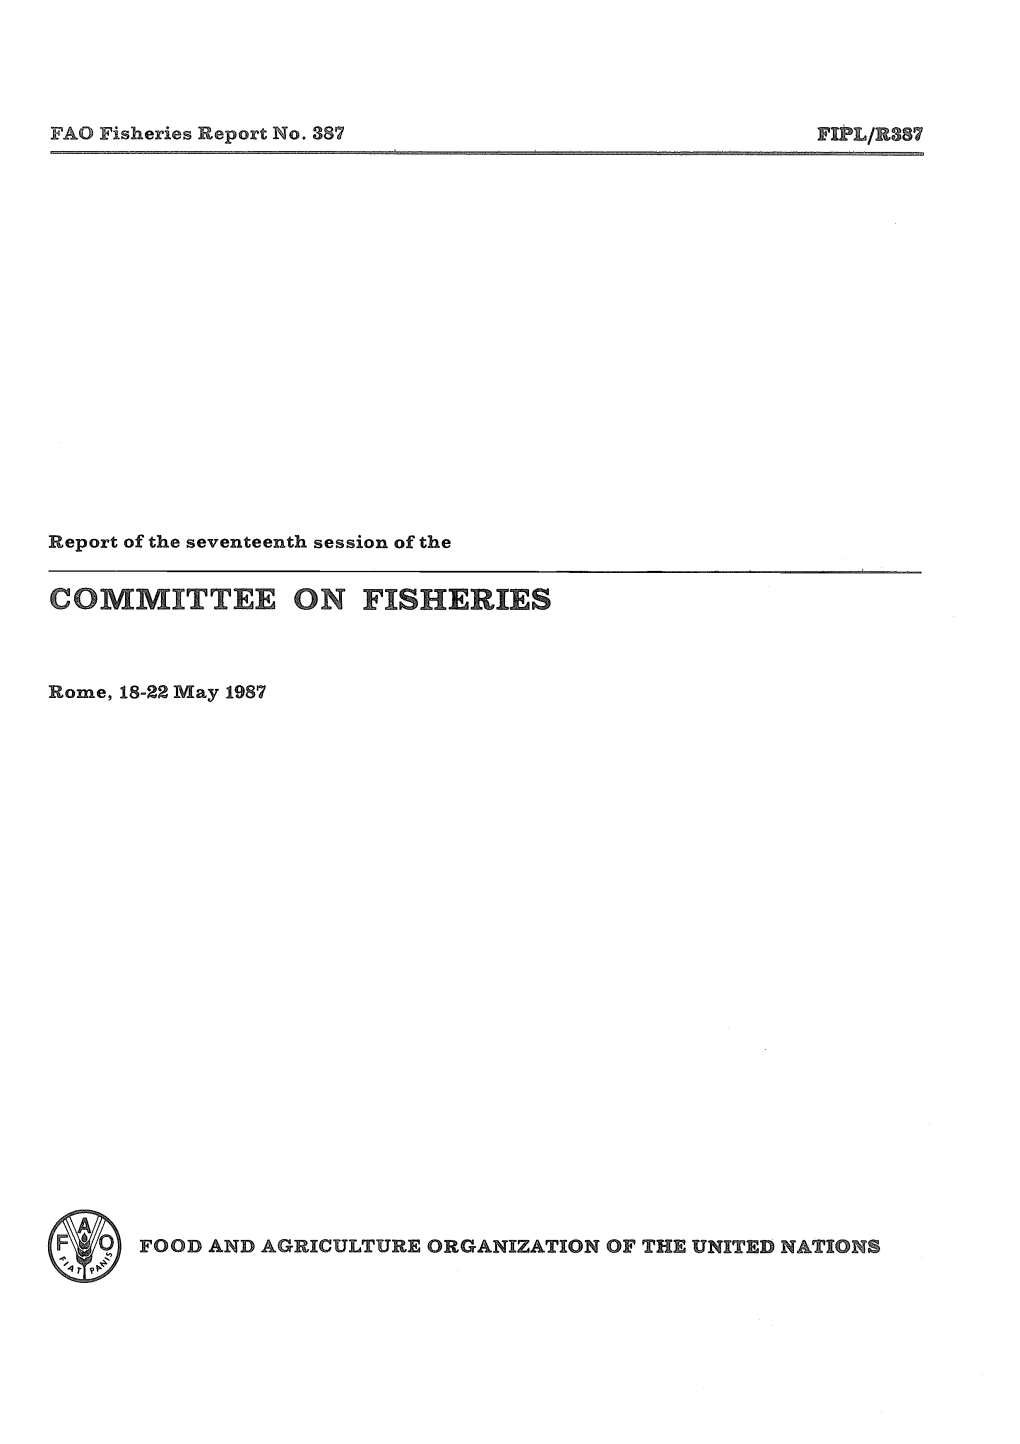 Report of the Seventeenth Session of the Committee on Fisheries. Rome